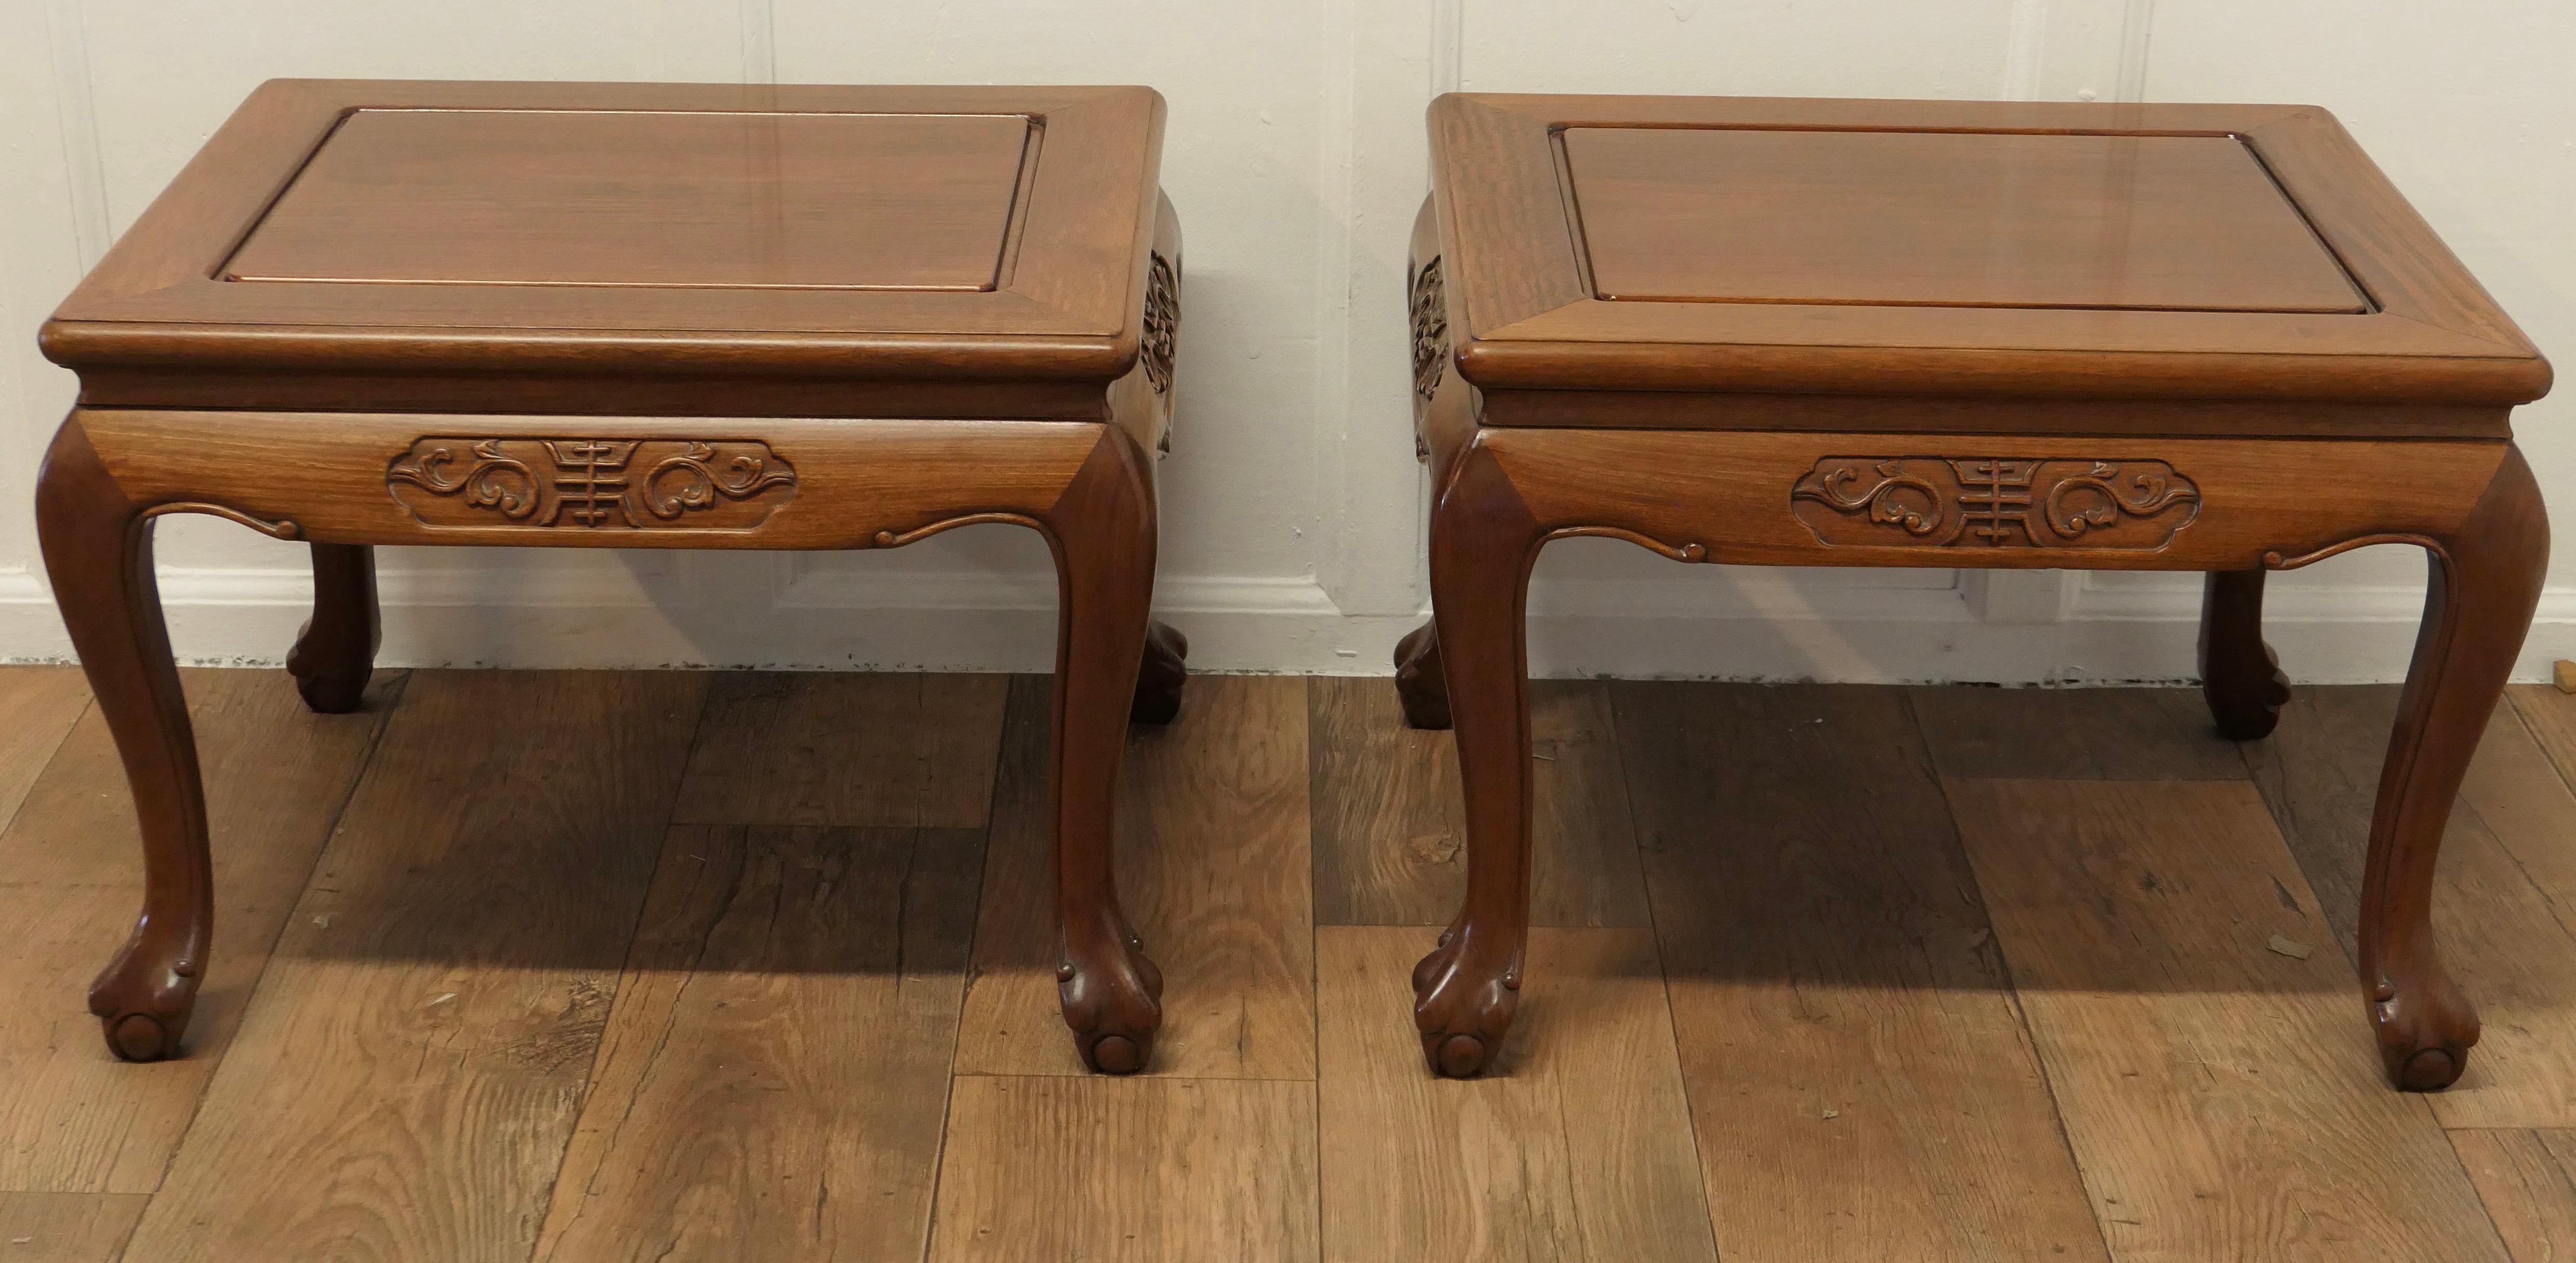 A Pair of Oriental Teak Low Tables, Coffee Tables

This is a very attractive pair, the tables stand on Carved cabriole legs with decorative carving around the aprons
The tables are good and sound with a good patina, they would work well as either